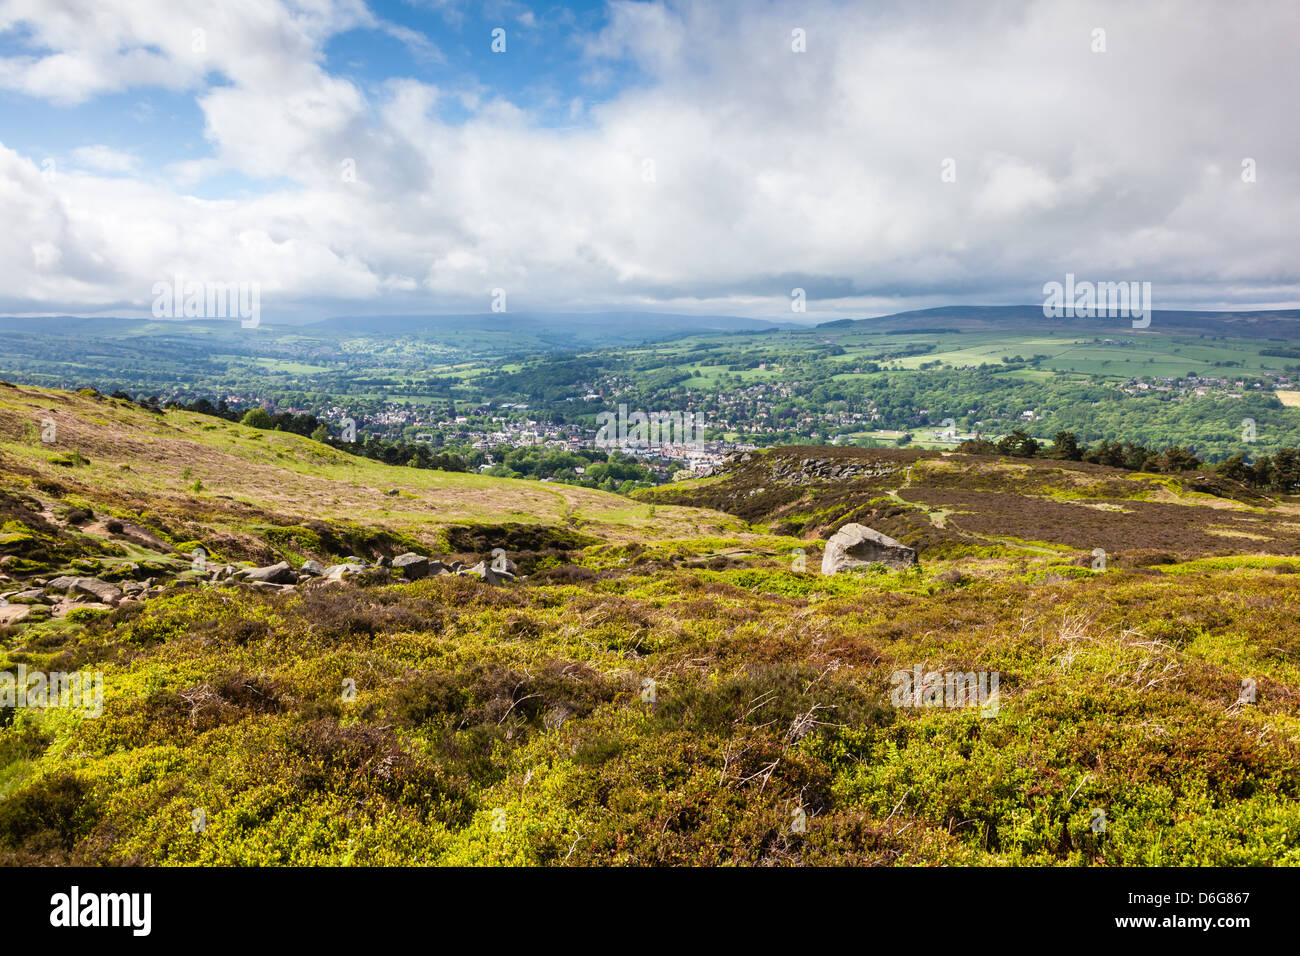 Views along the Dales Way on Ilkley Moor, Ilkley, West Yorkshire, UK Stock Photo